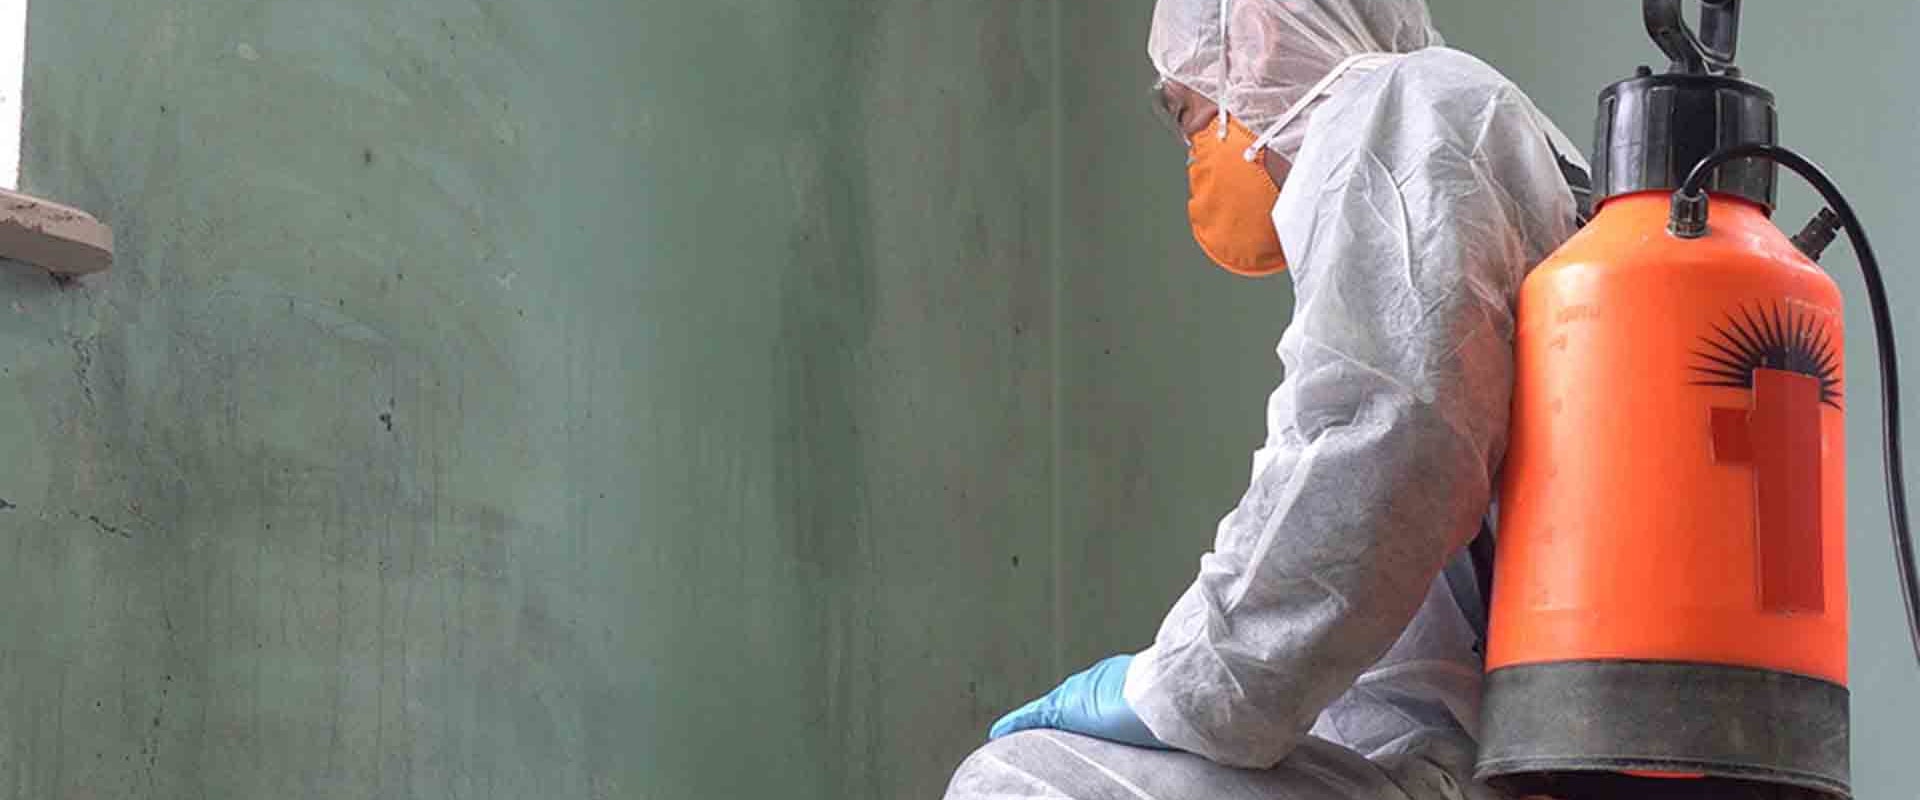 What Personal Protective Equipment is Needed for Mold Removal?